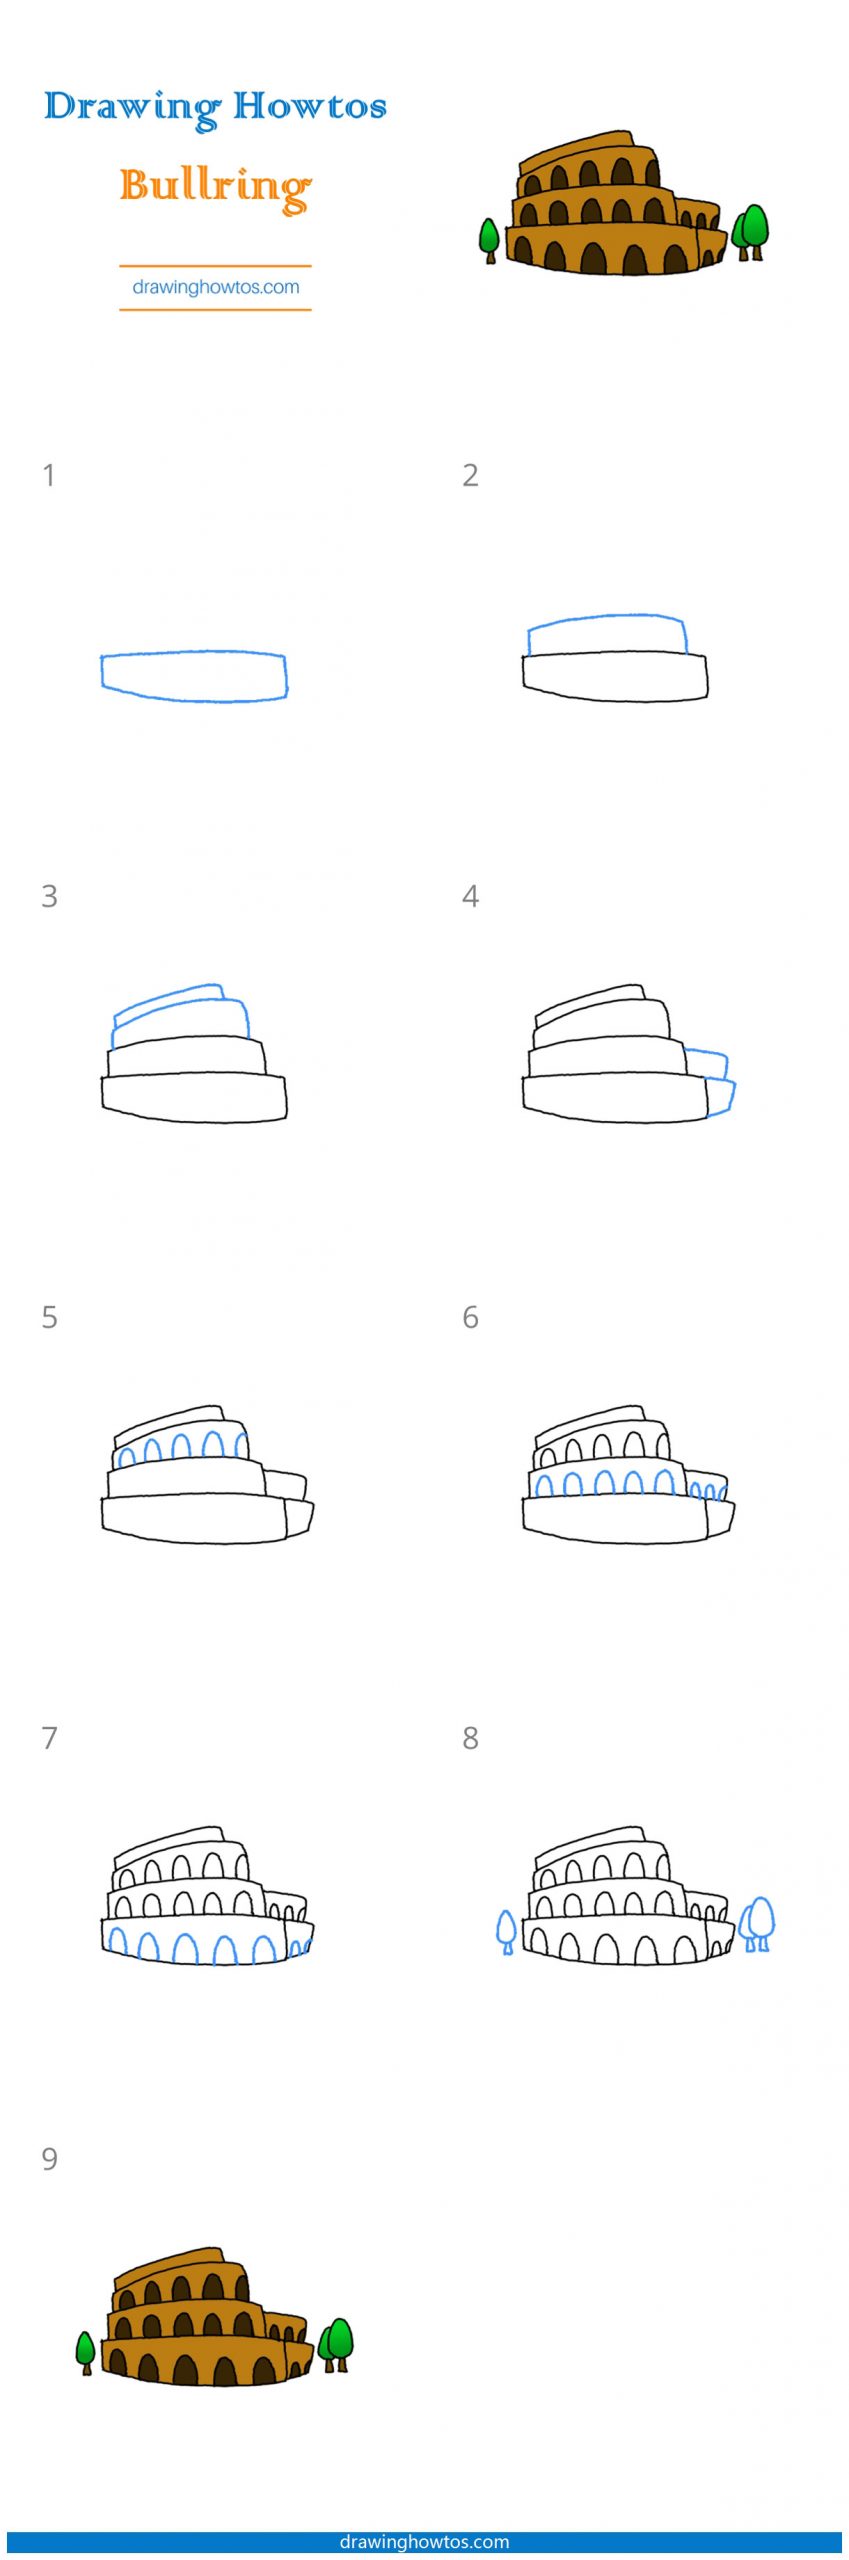 How to Draw a Bullring Step by Step